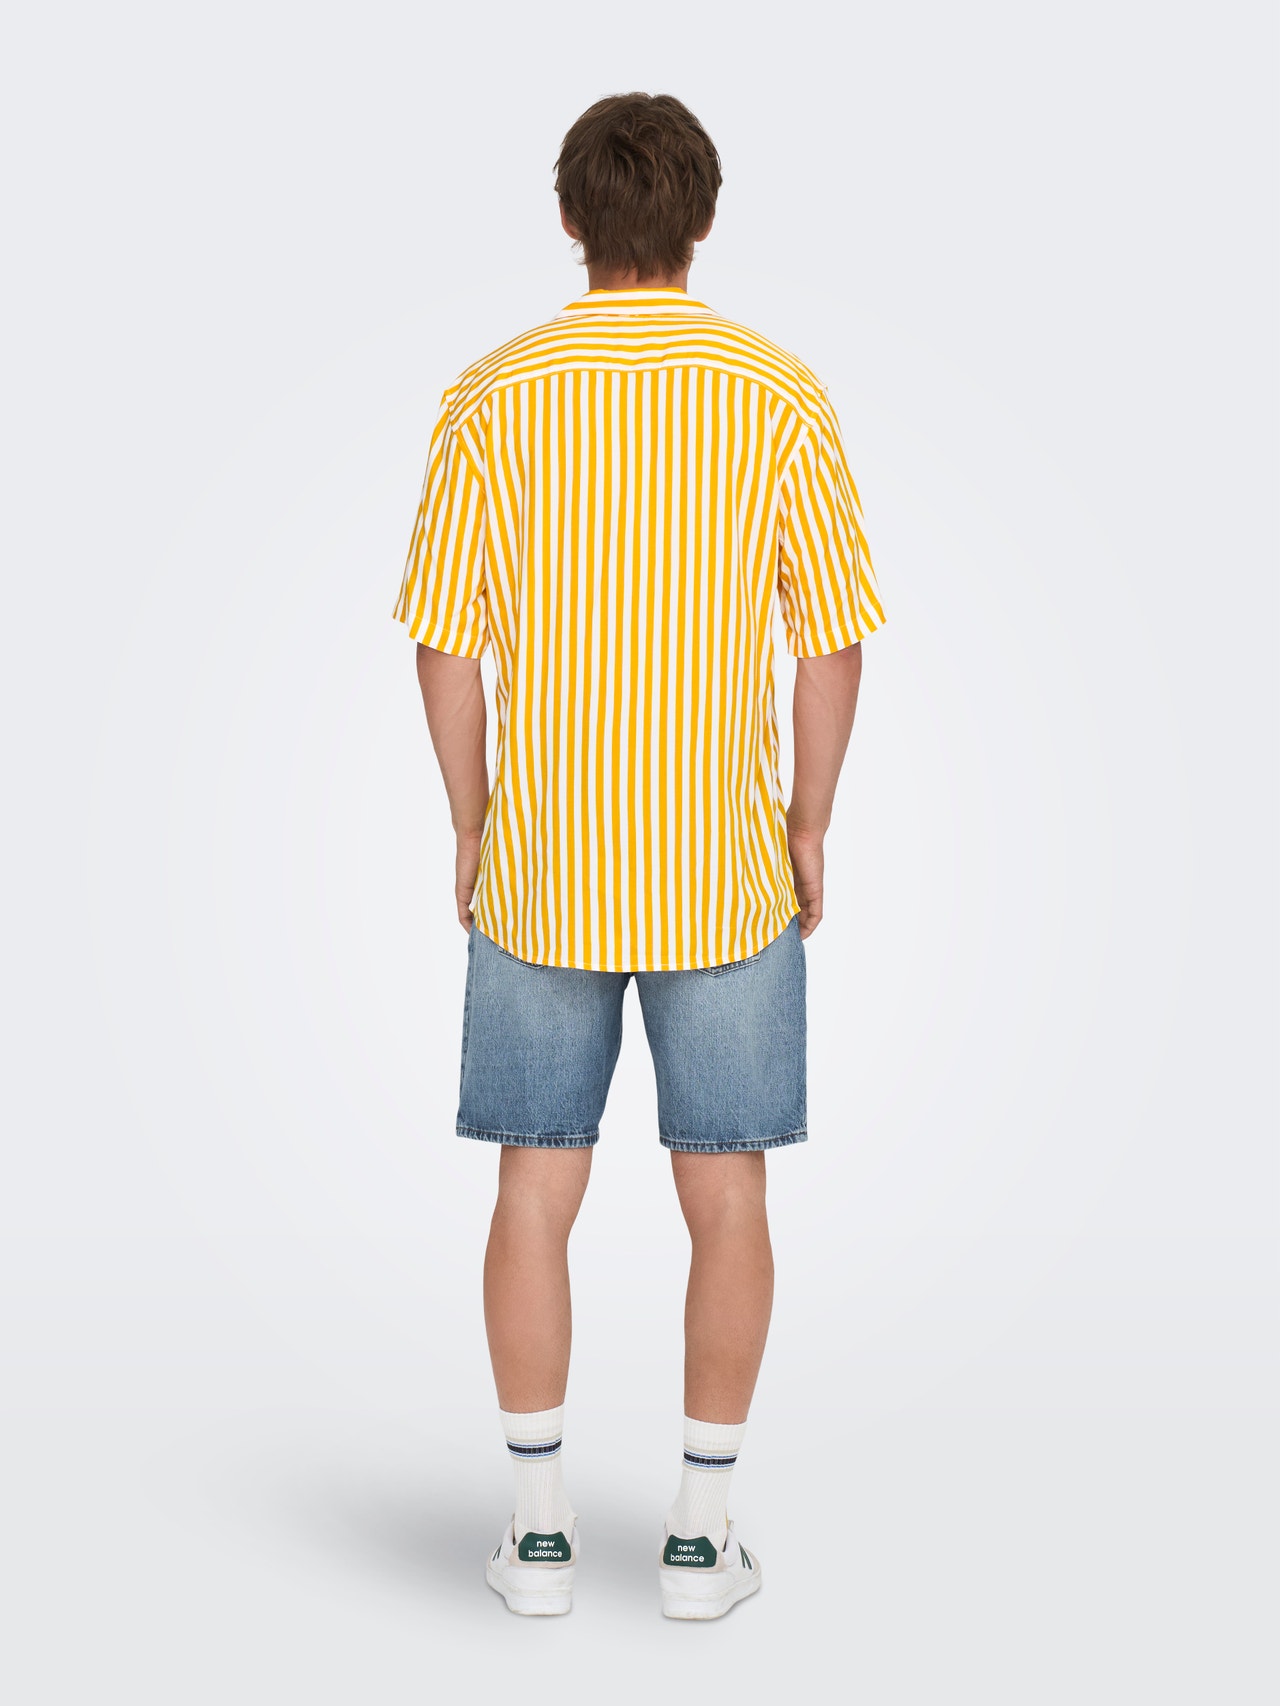 ONLY & SONS Short sleeved striped shirt -Mango Mojito - 22013267